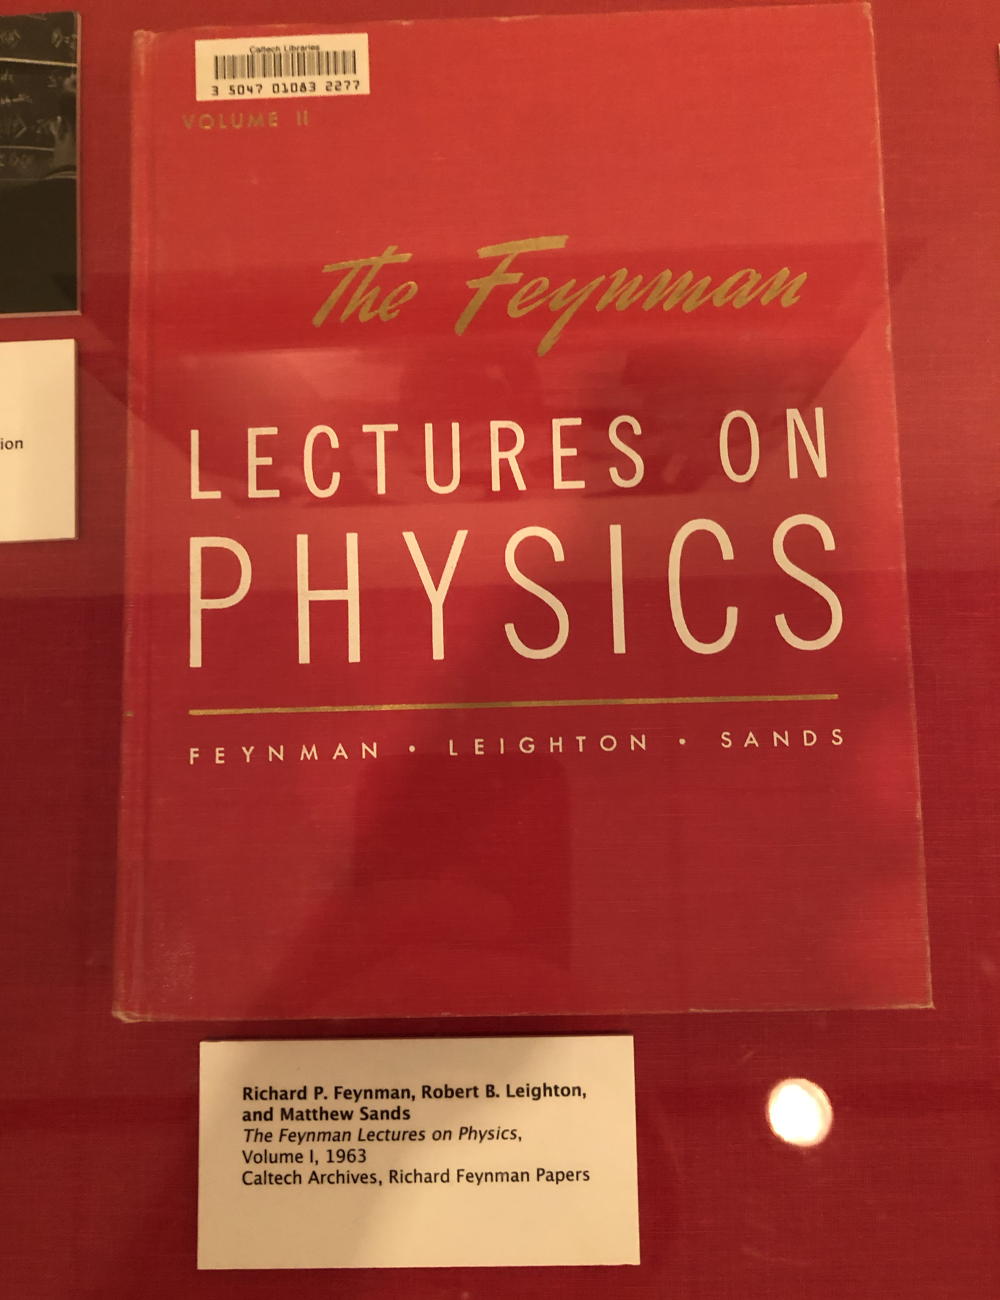 Feynman Lectures at Caltech Exhibit